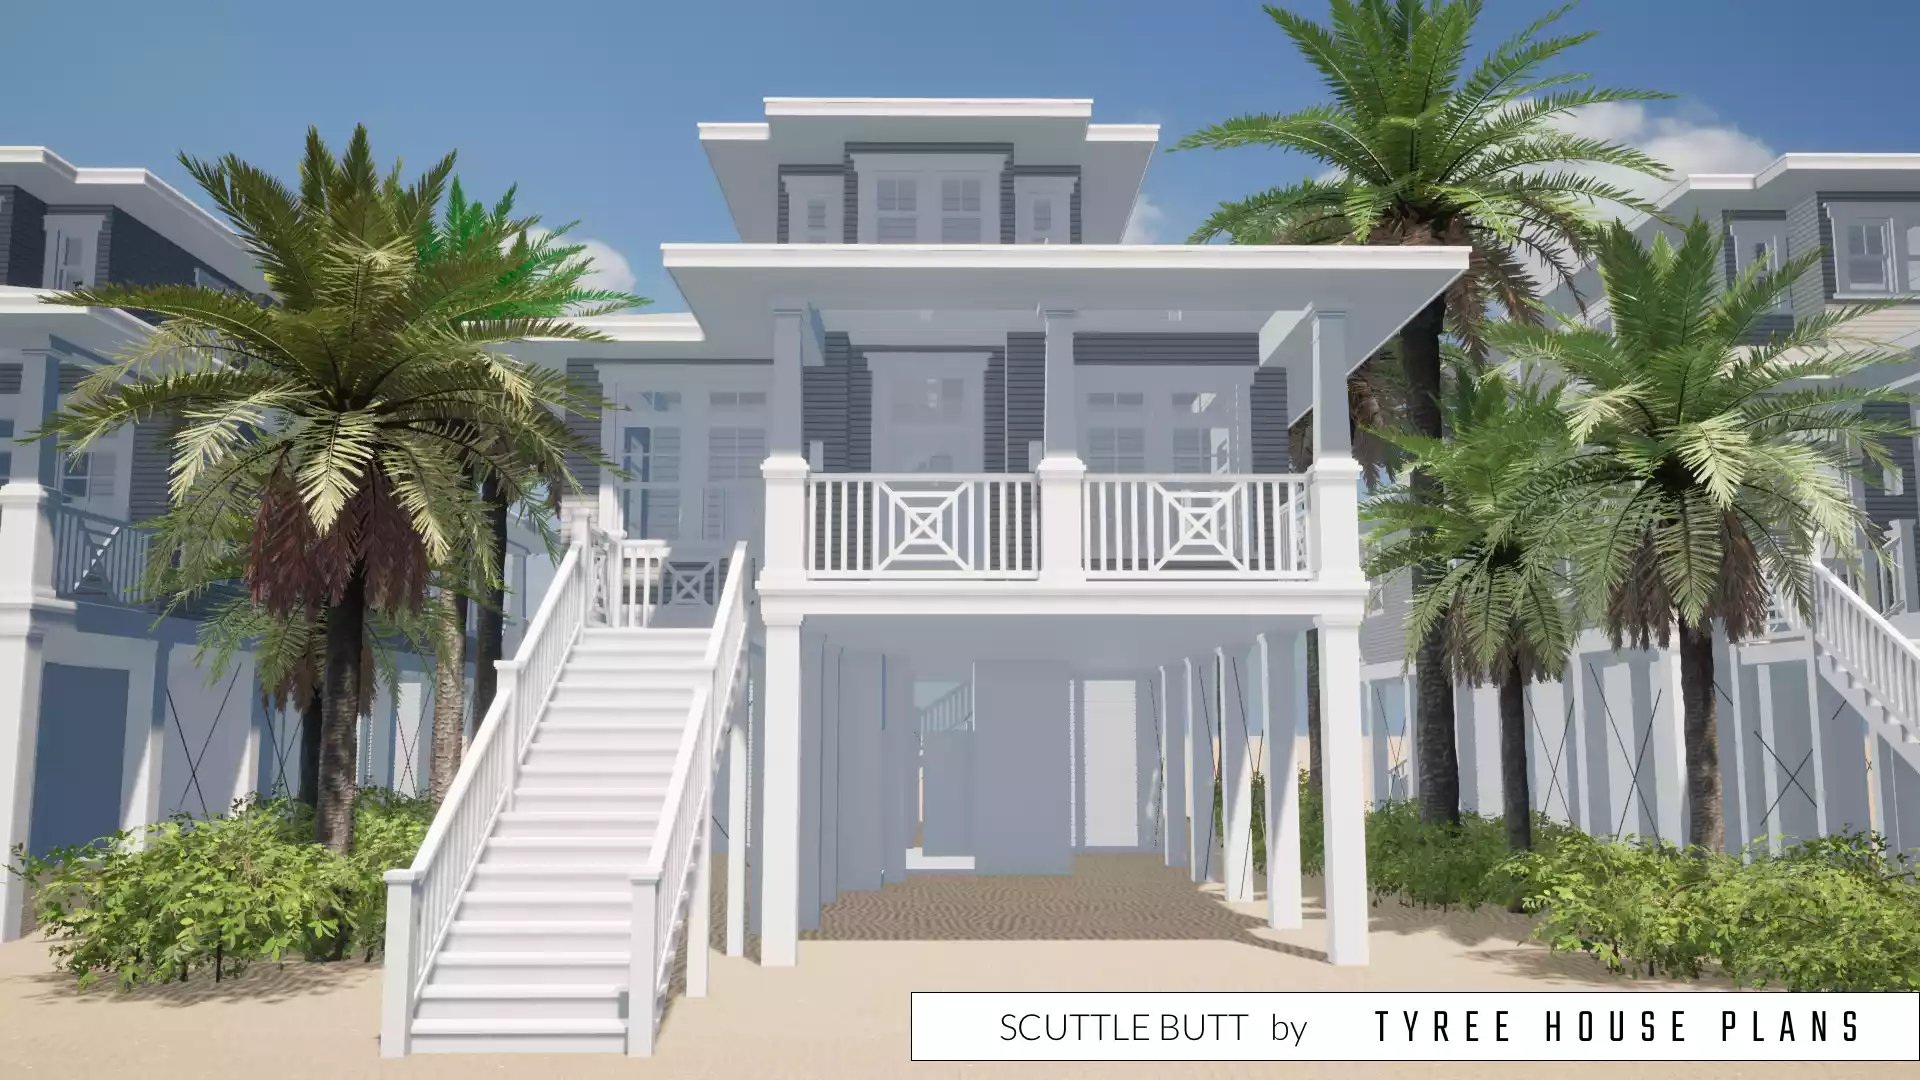 Front view of the house. Scuttle Butt by Tyree House Plans.